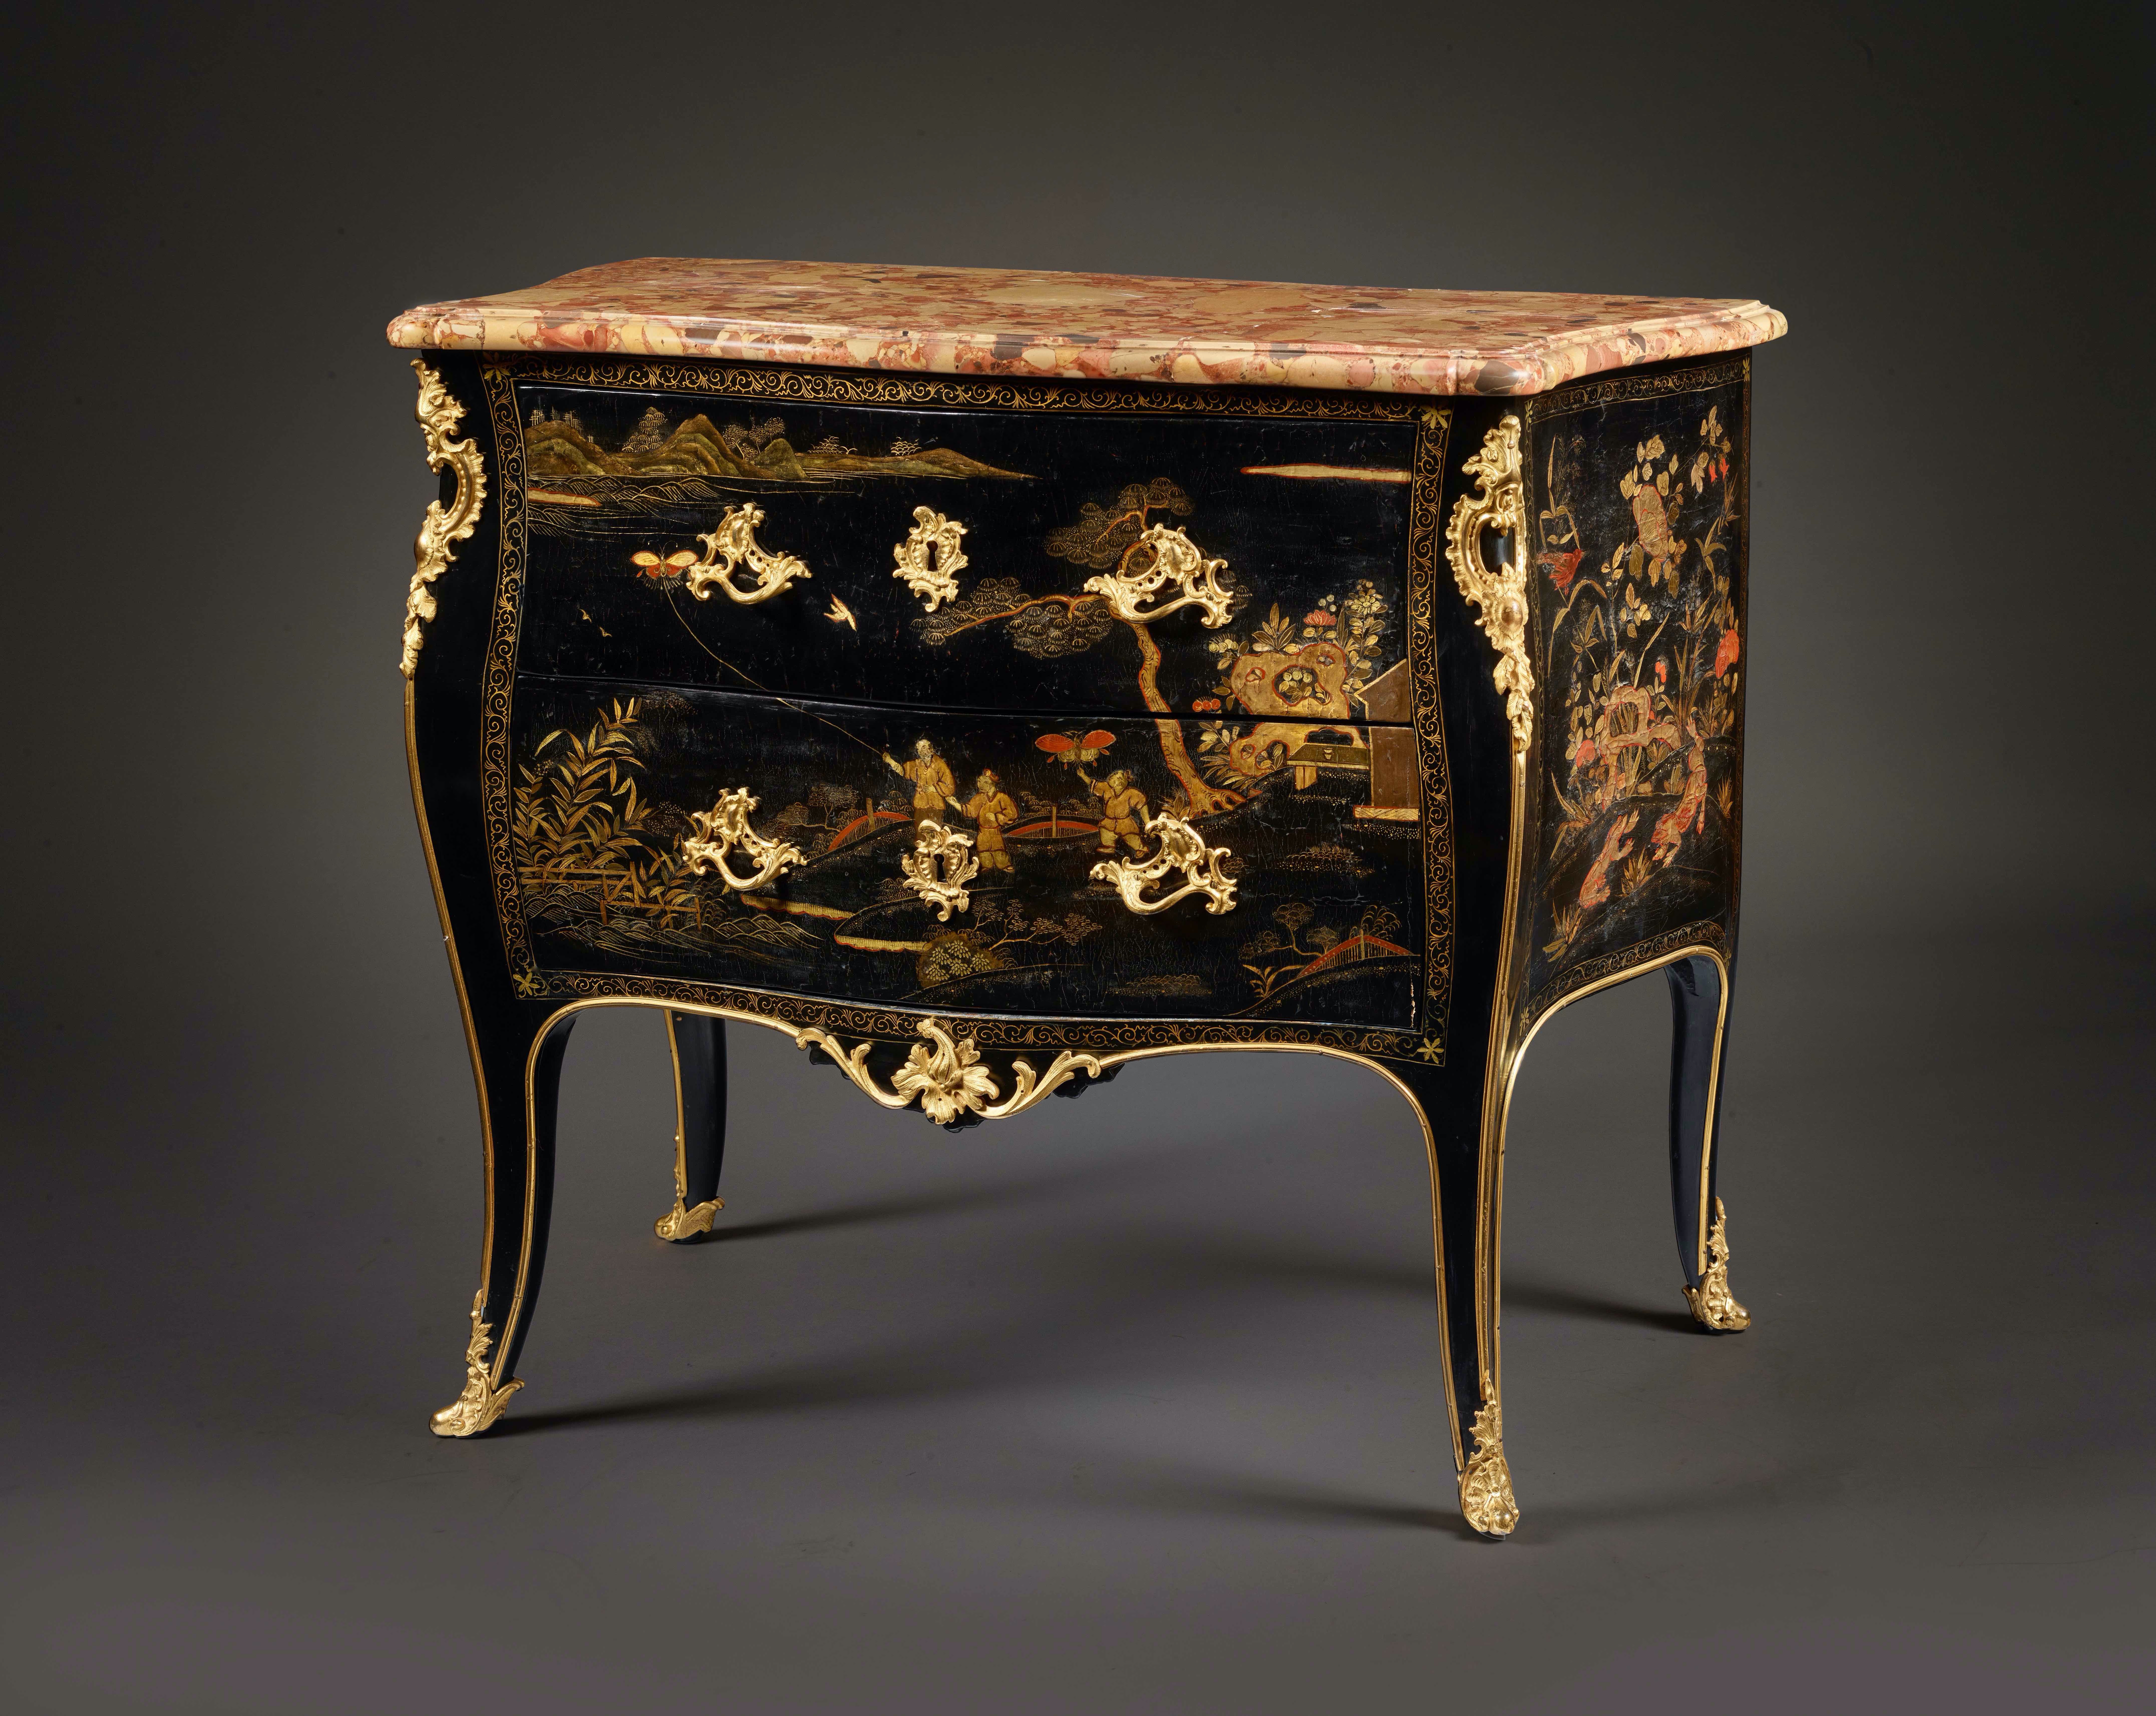 French Royal Styles of the 17th Century Meet the Experts | TEFAF | The European Fine Art Foundation